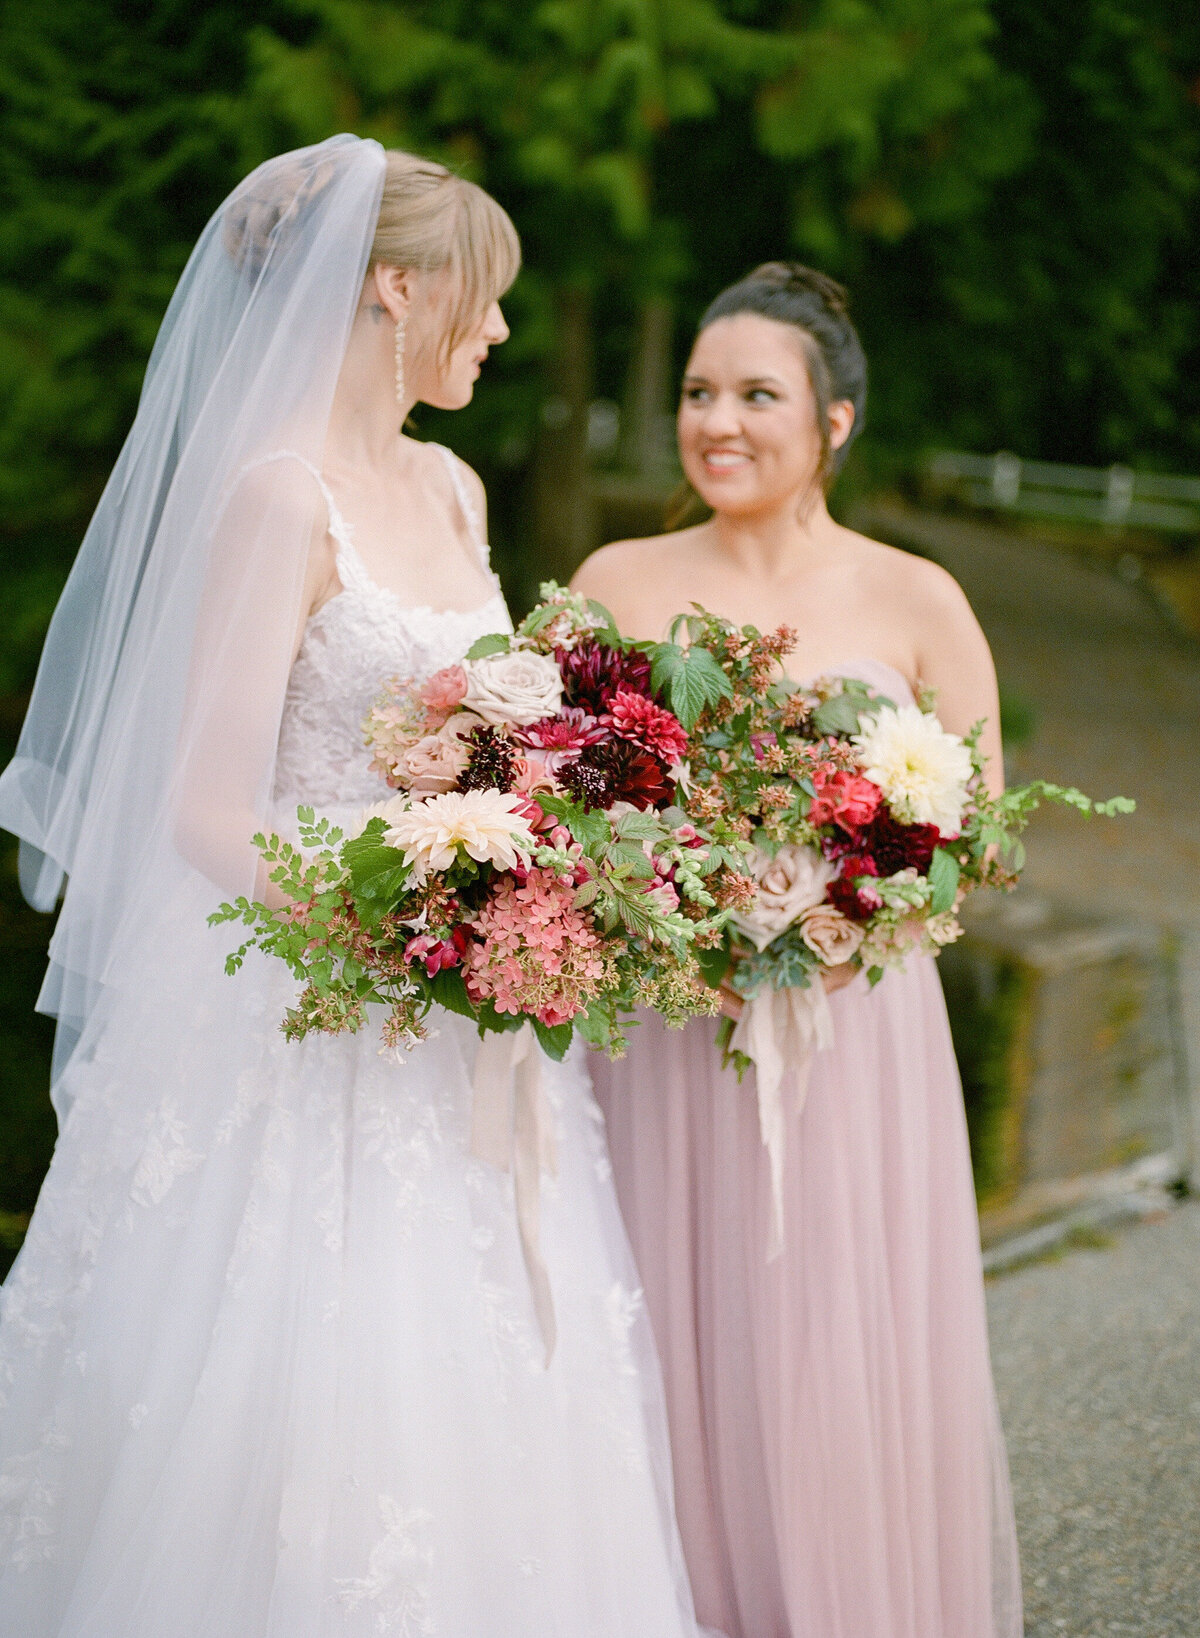 4 - Ashlie & William - Chateau Lill Wedding - Kerry Jeanne Photography  (13)